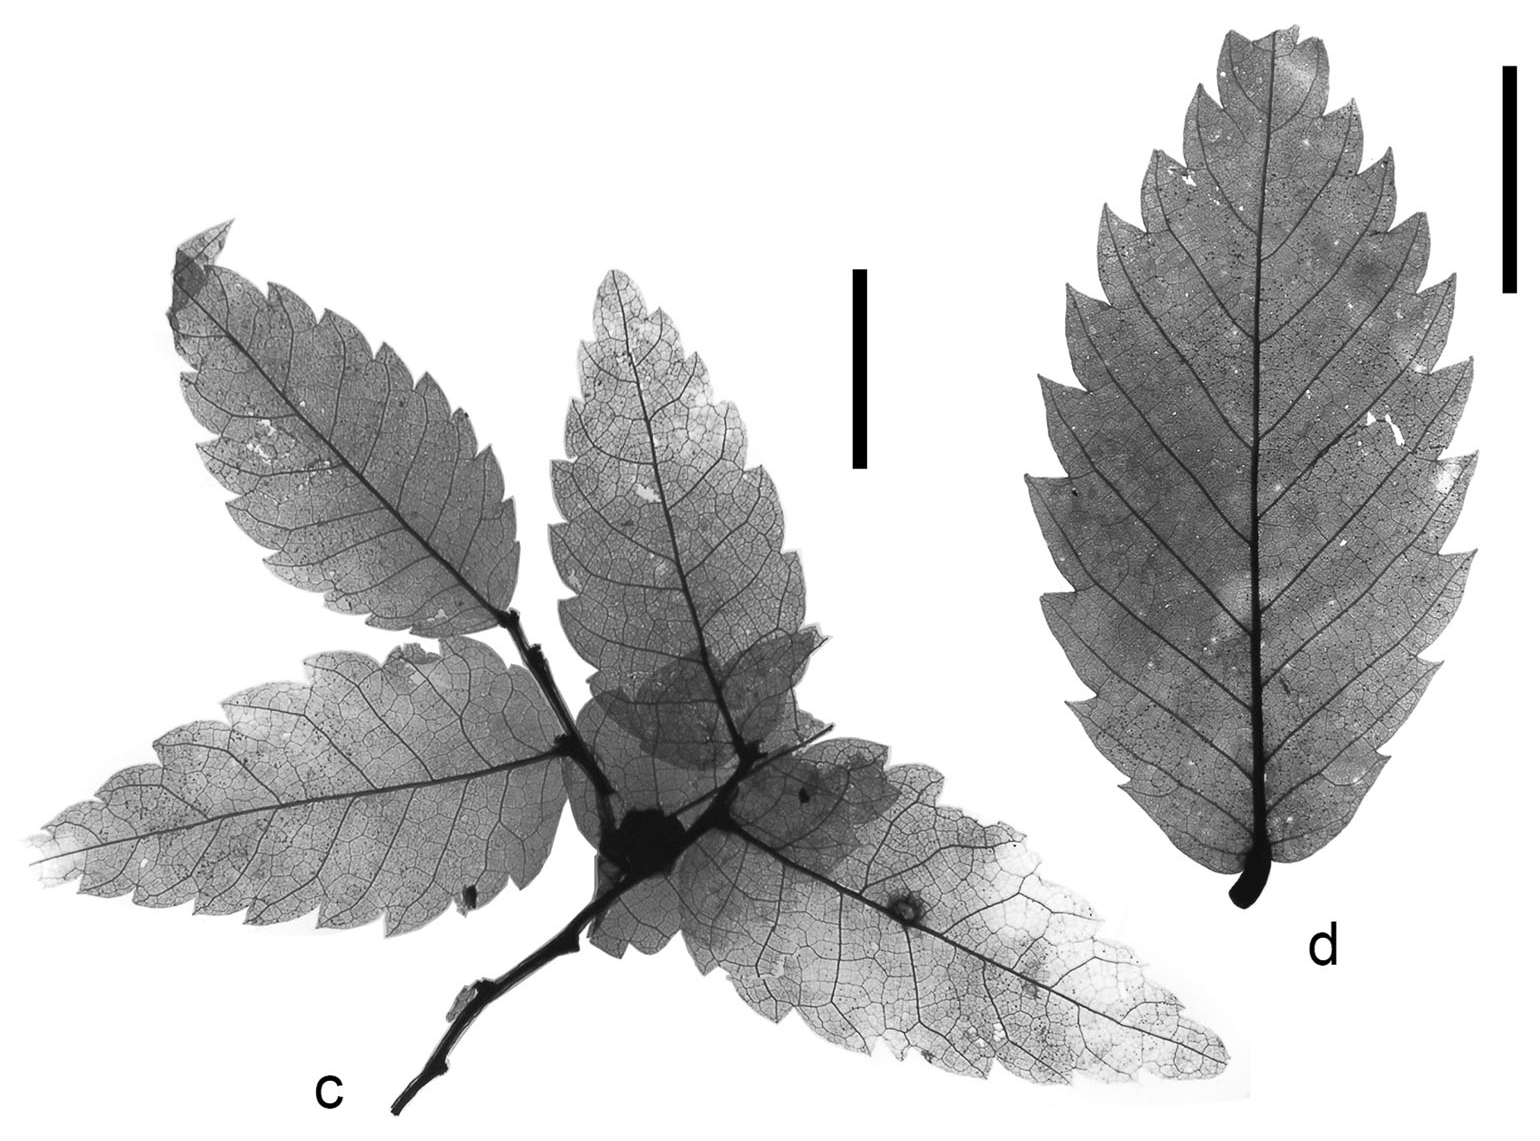 Image of mummified zelkova leaves showing a specimen of simple leaves on a branch and a single simple leaf.